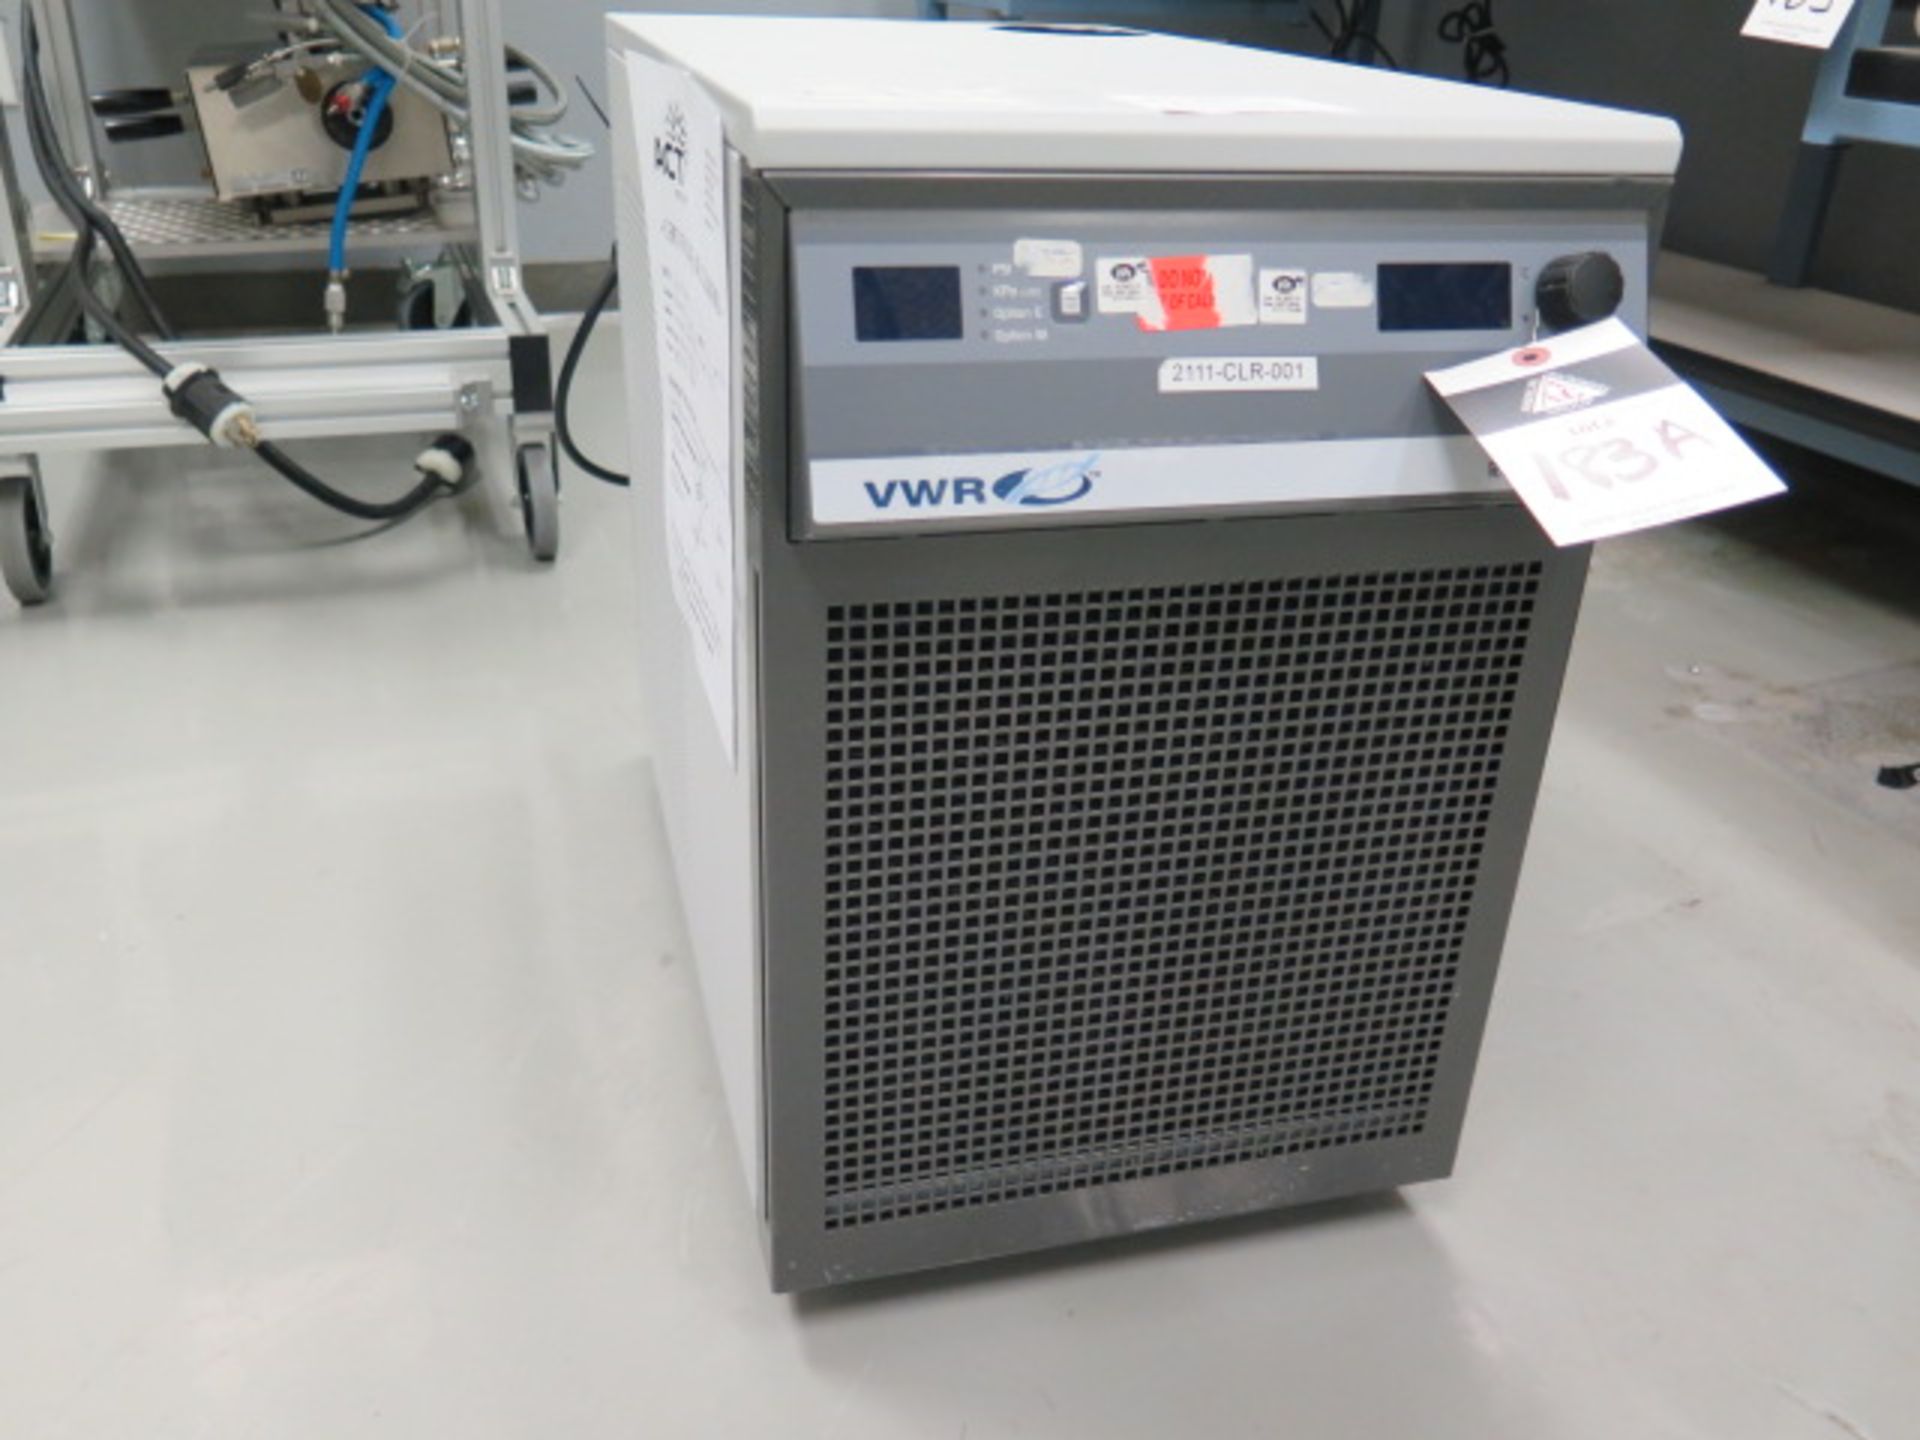 VWR mdl. 1179PD “Recirculator” Refrigerated Cooling System s/n SM1490532 (SOLD AS-IS - NO WARRANTY) - Image 6 of 13